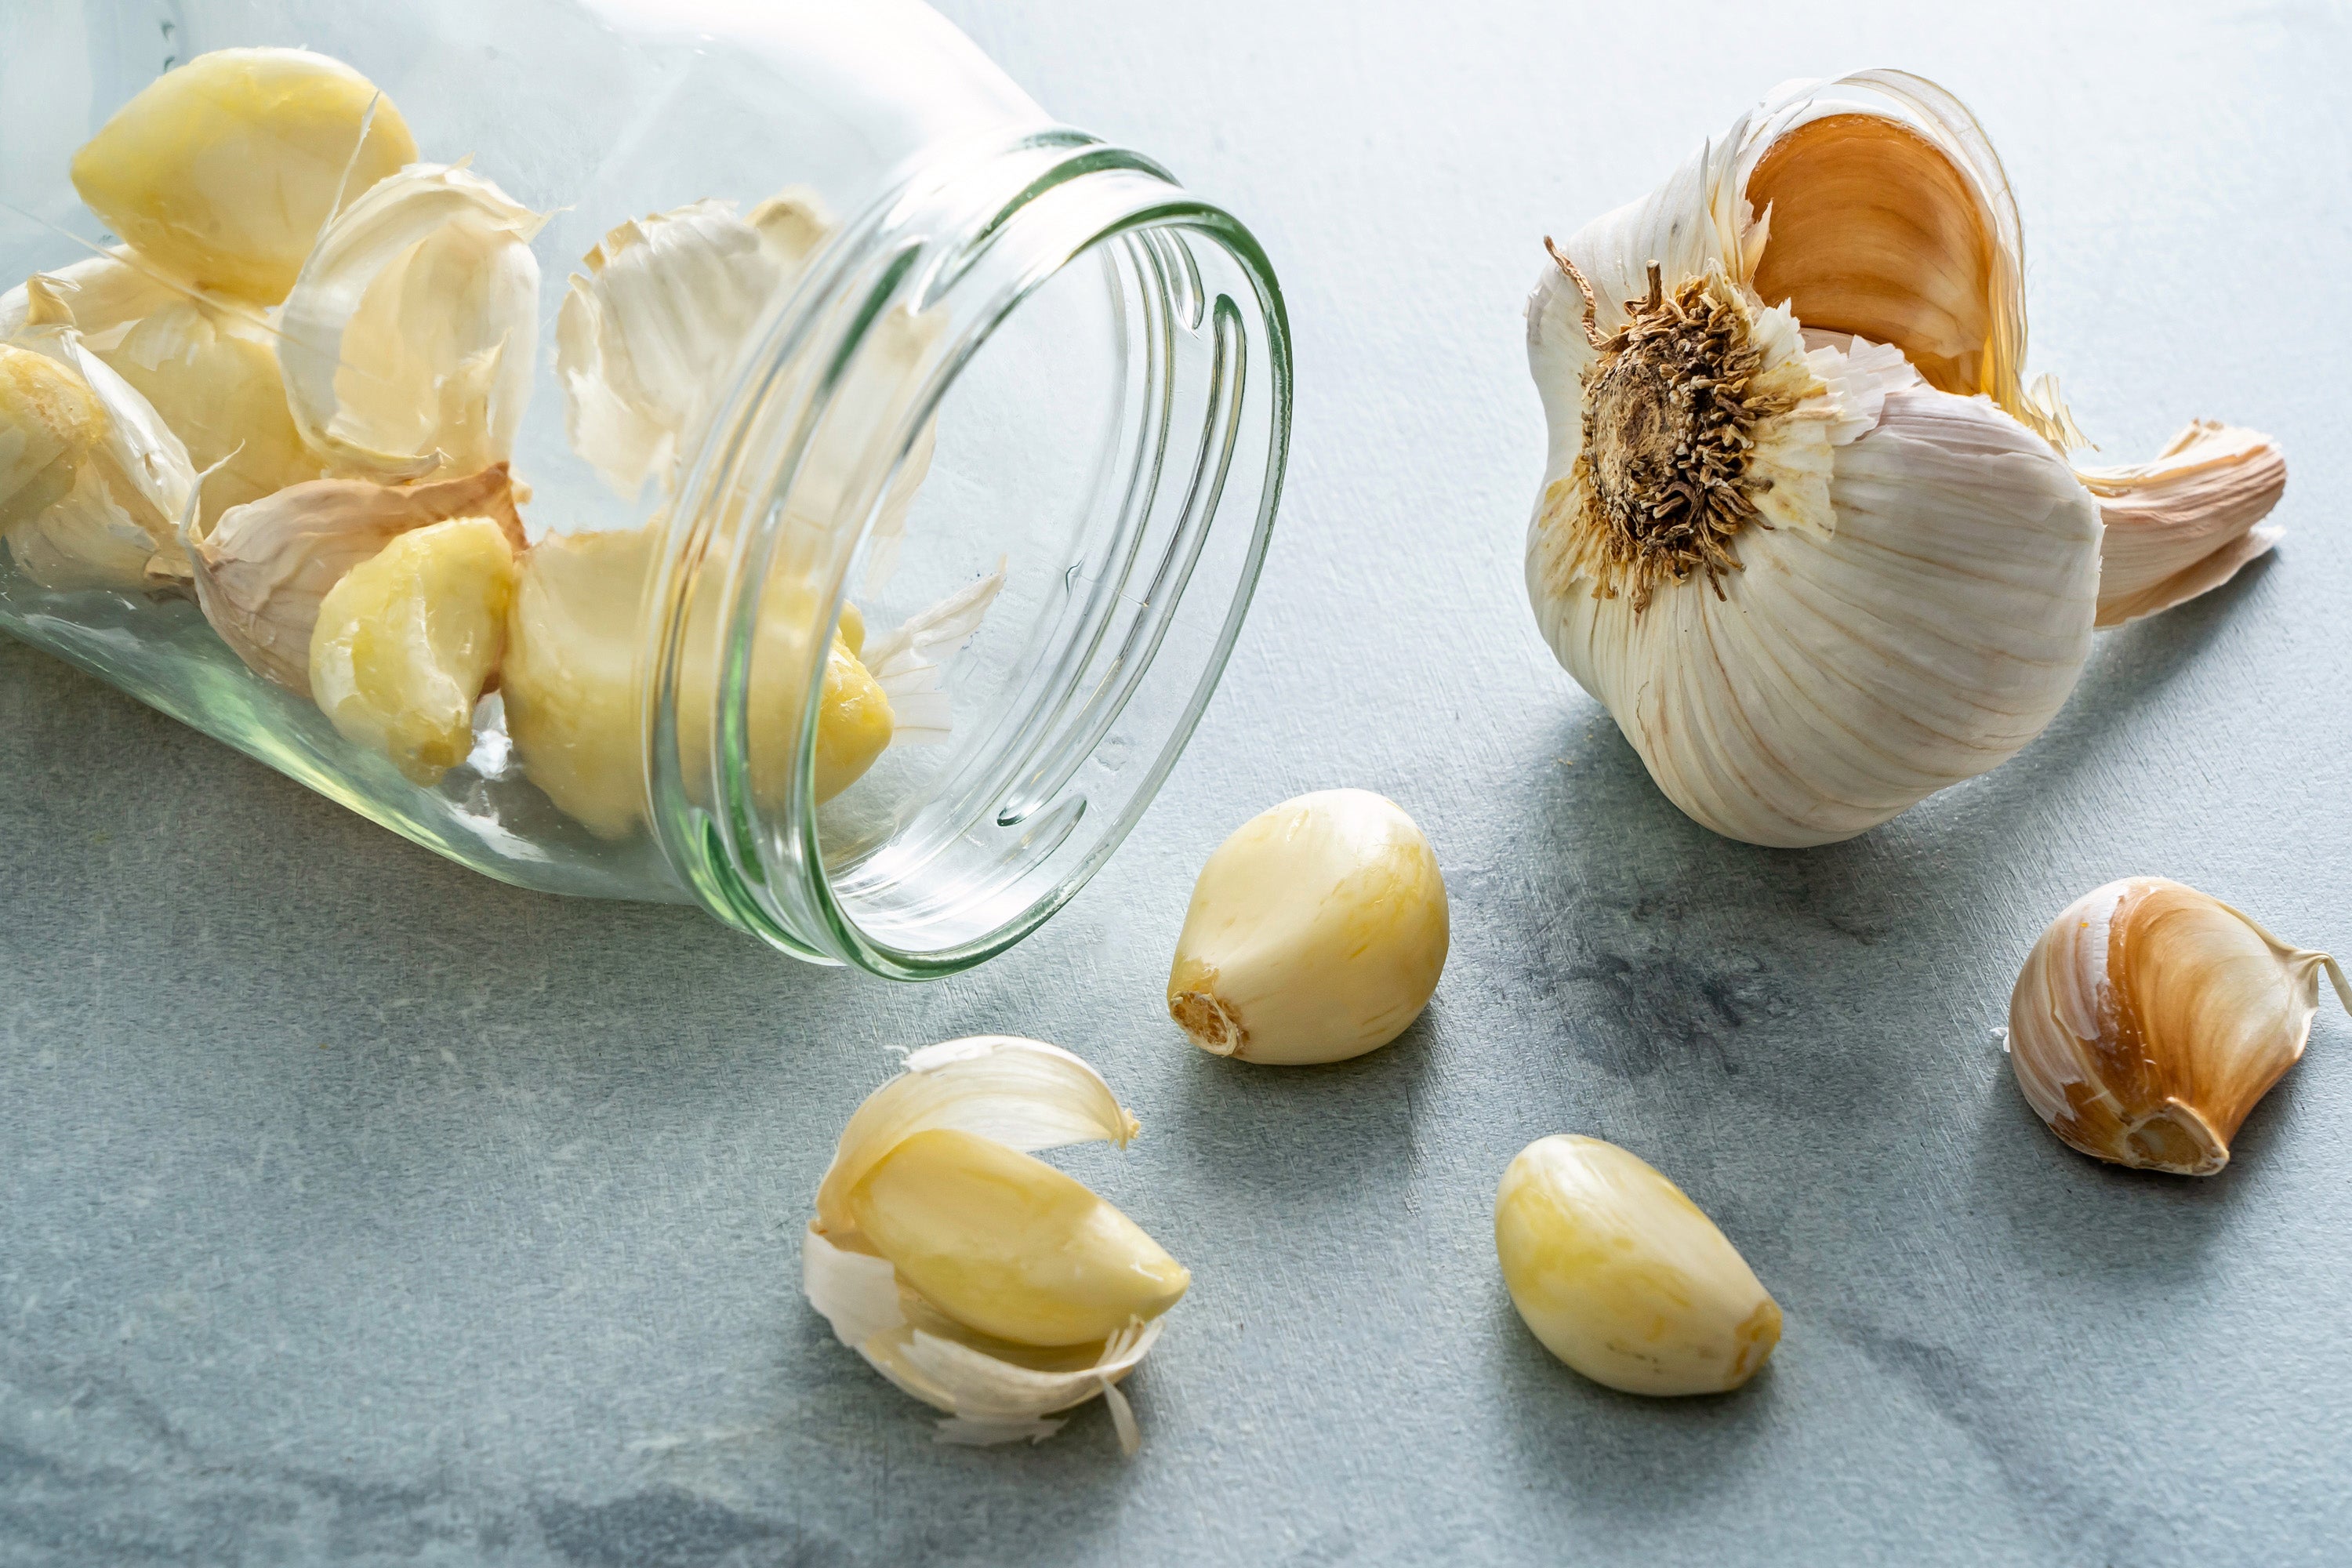 To remove garlic's papery skin, place the cloves in a large, clean, dry jar with a hard lid and shake vigorously for 15 to 20 seconds